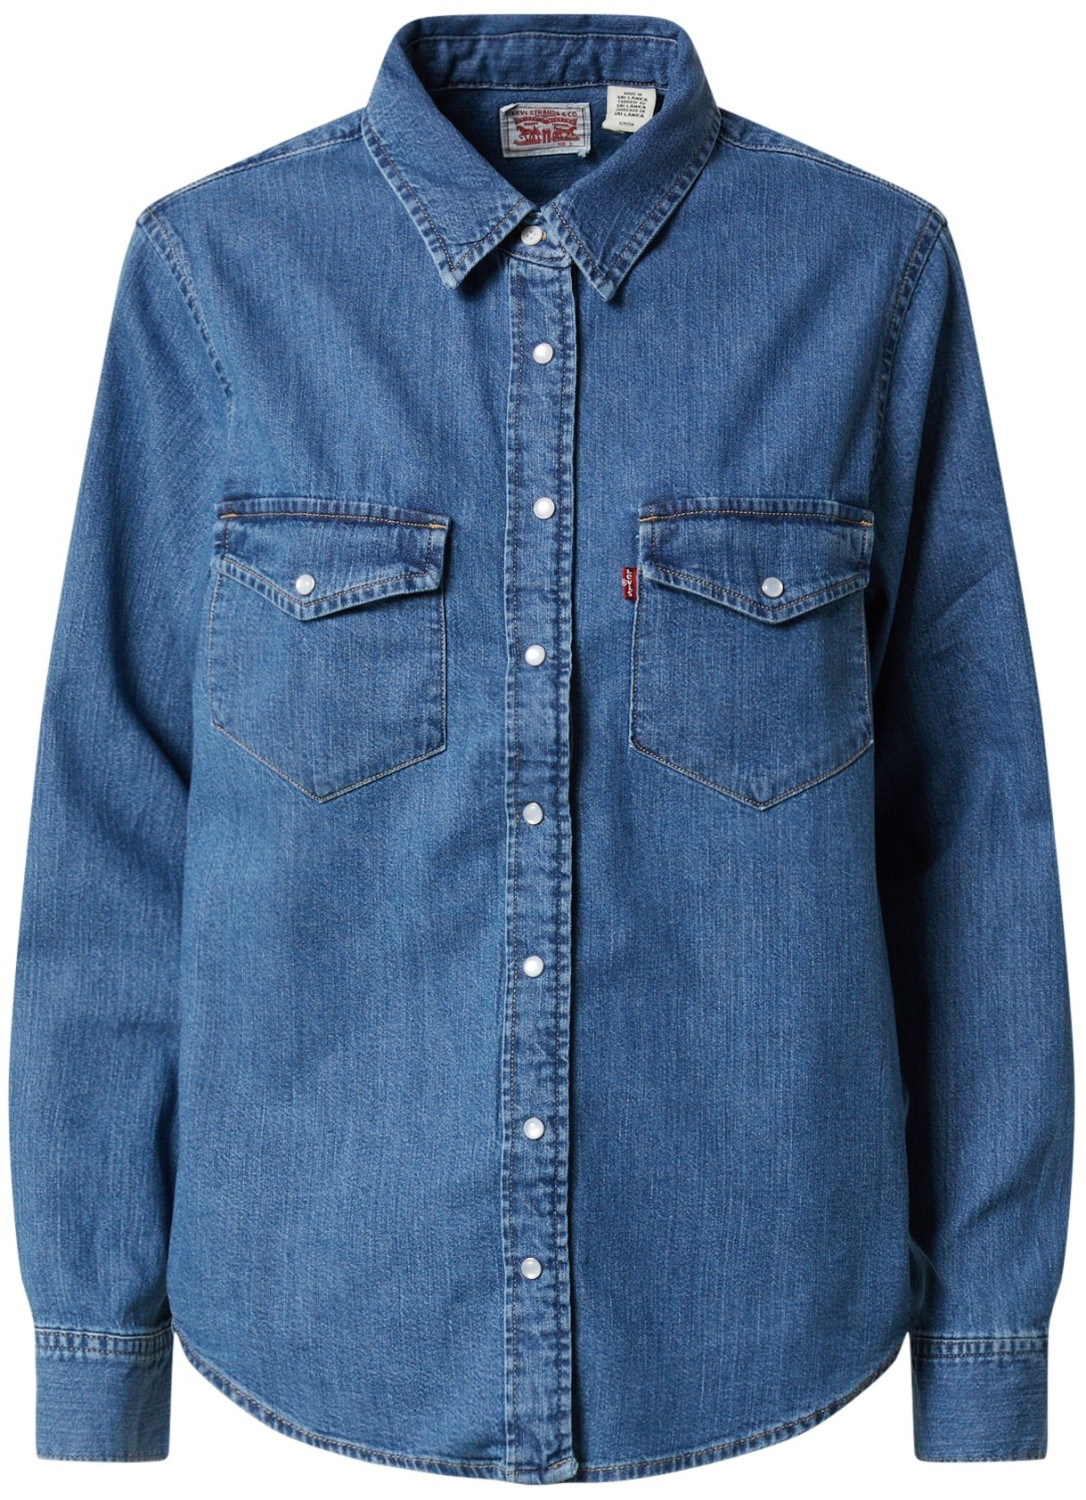 Buy Levi's Essential Western Shirt from £36.99 (Today) – Best Deals on